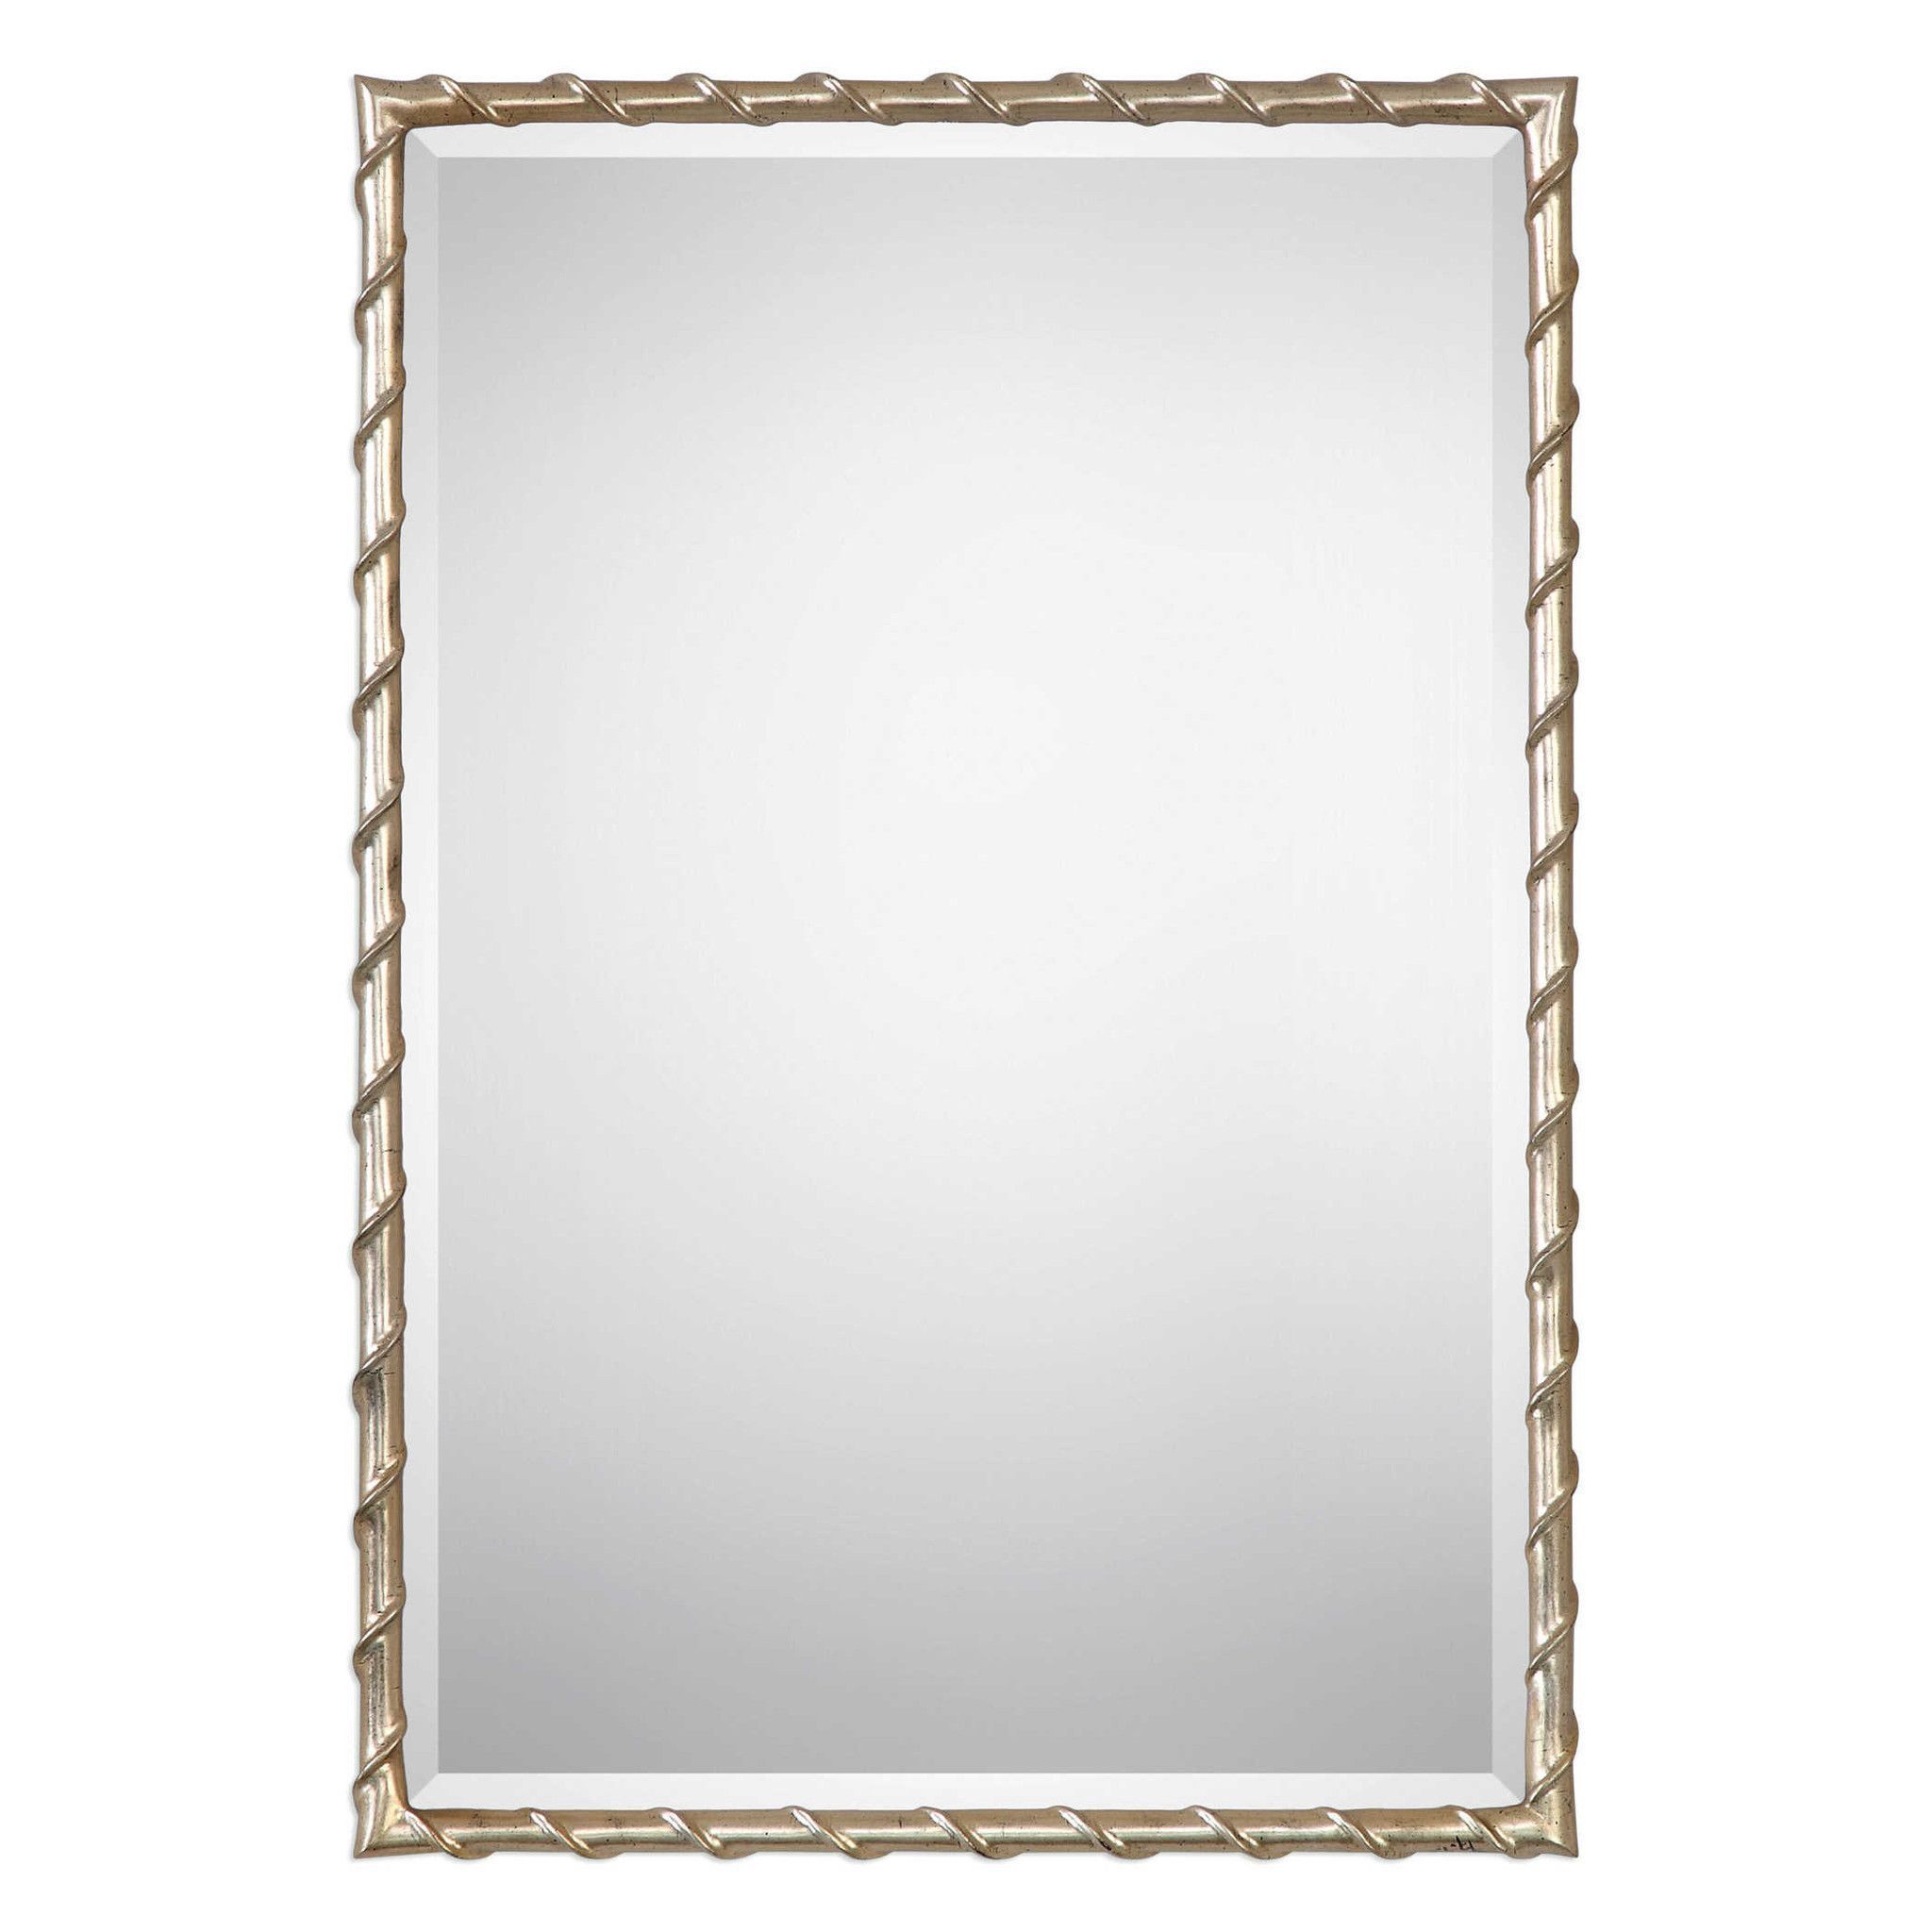 Uttermost Laden Silver Mirror | Mirror Wall, Framed Mirror Wall, Silver Regarding Silver Metal Cut Edge Wall Mirrors (View 4 of 15)